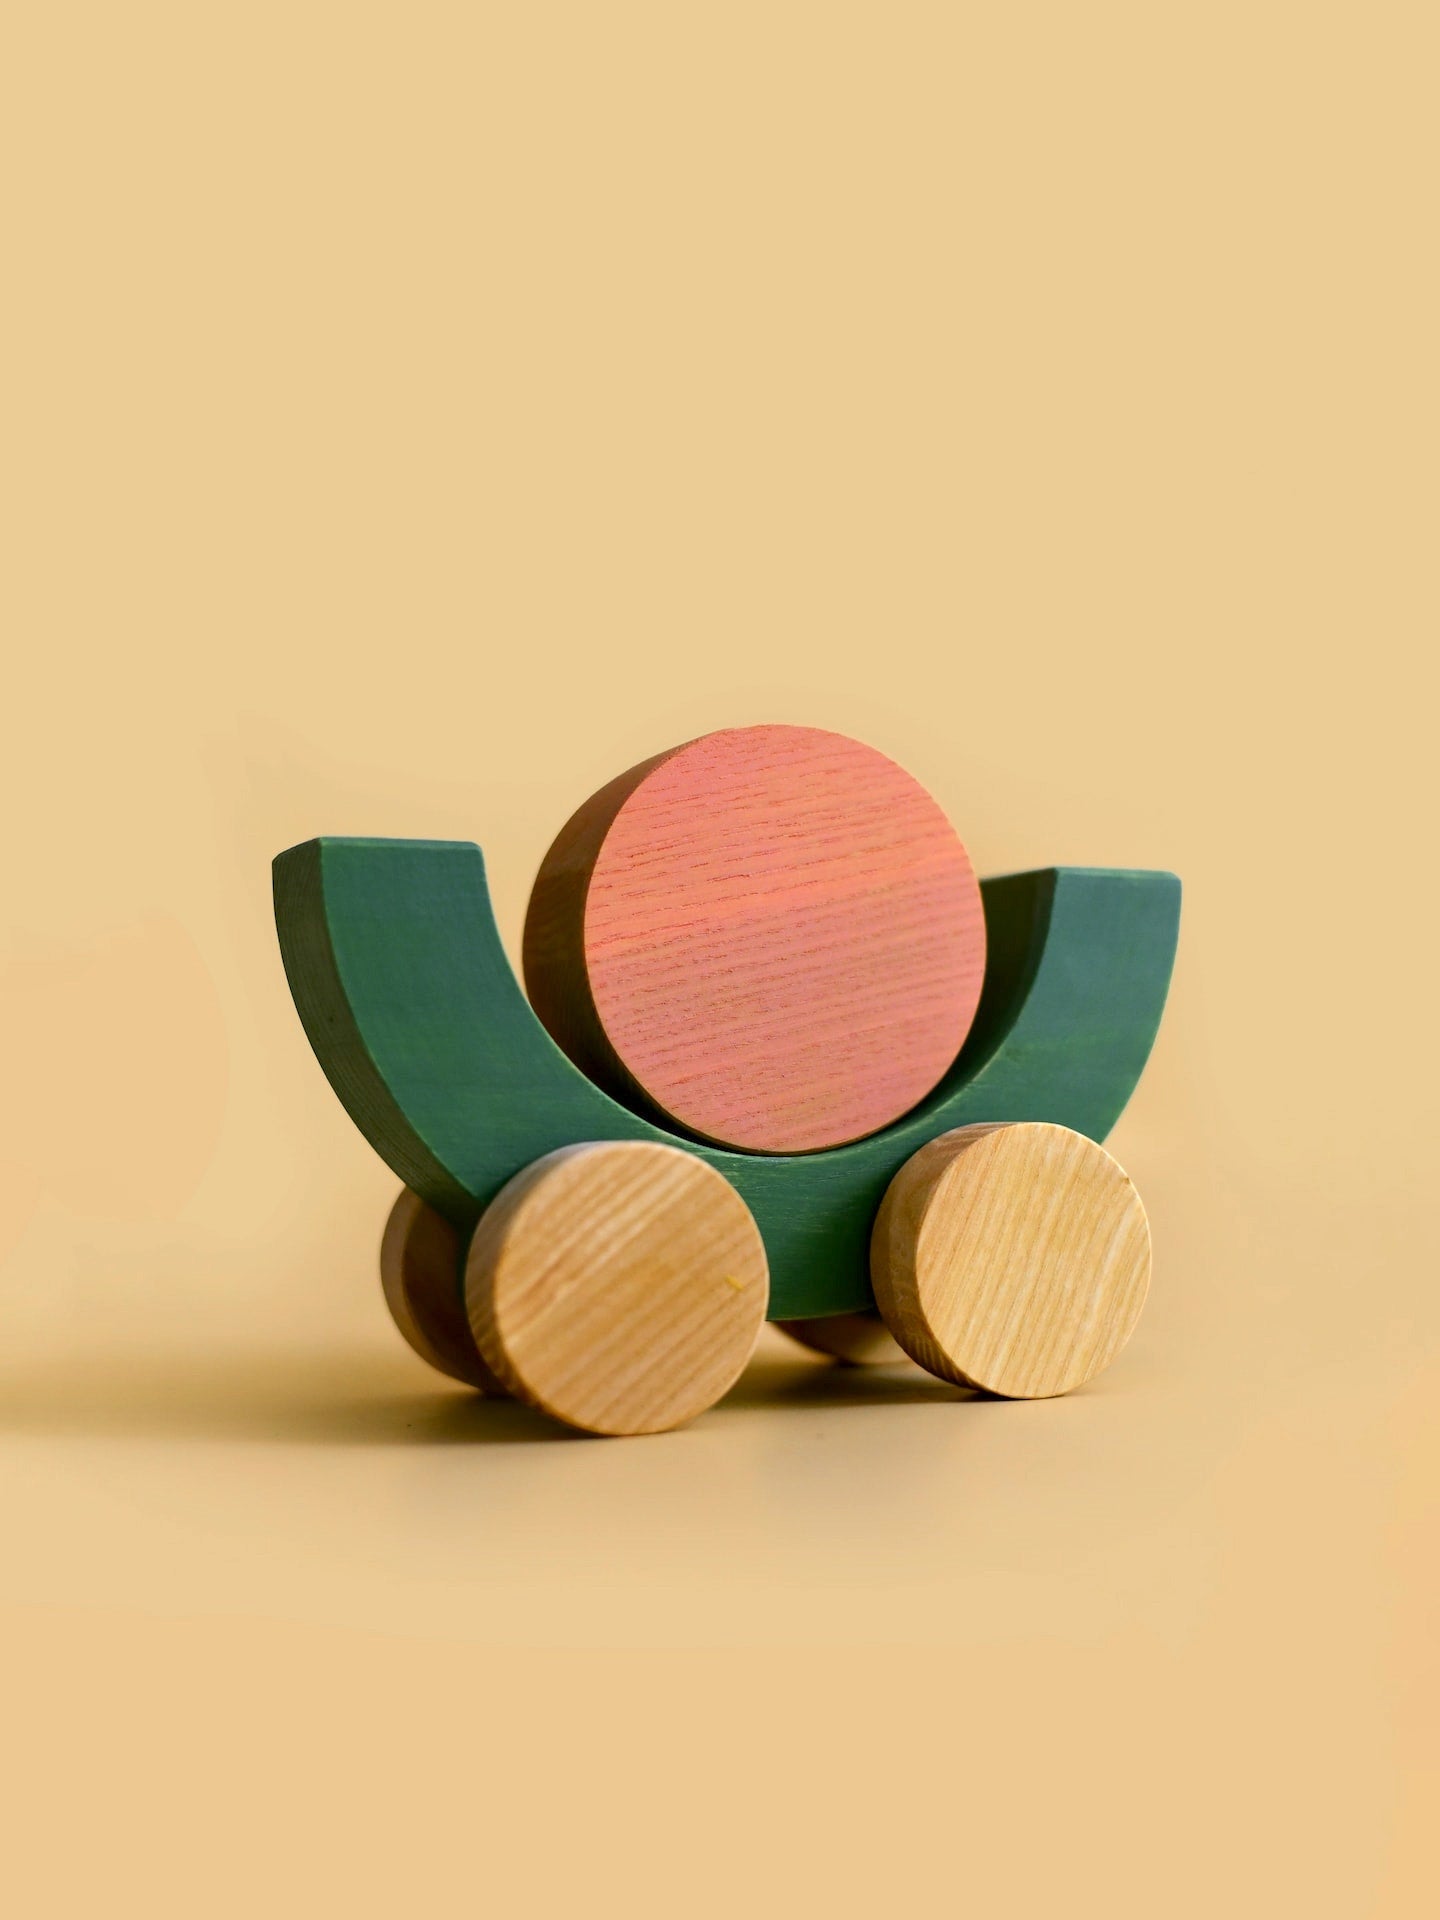 A MinMin Copenhagen Balancing Car with a pink and green ball on it.